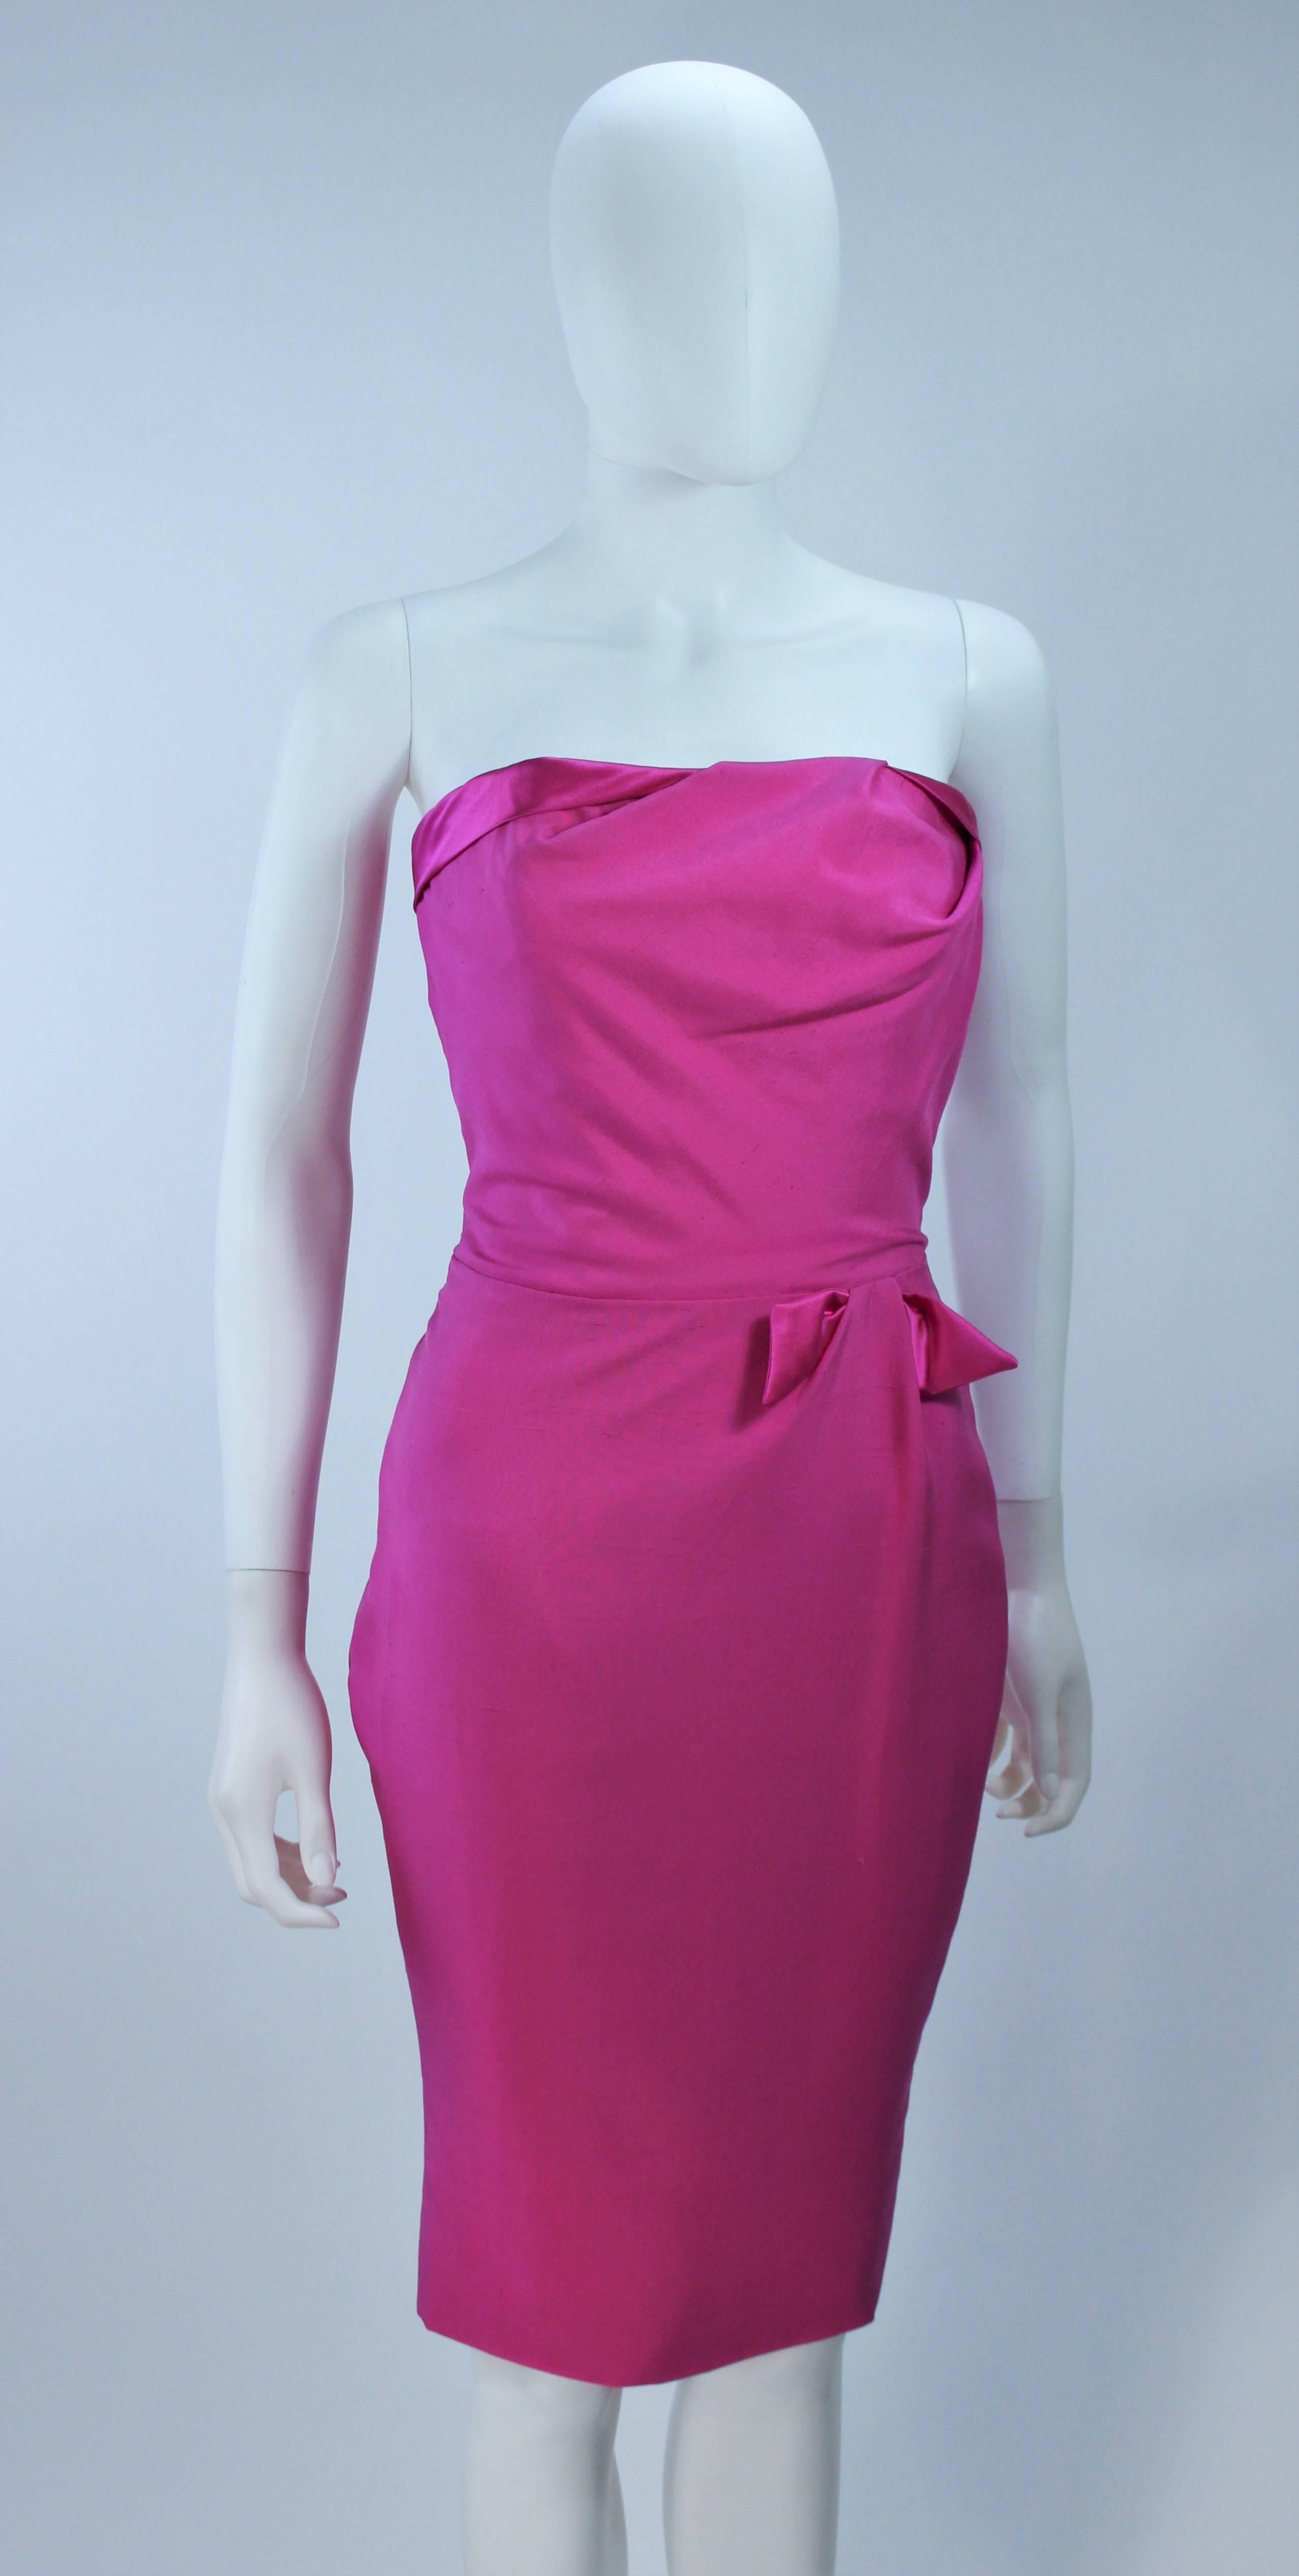 ELIZABETH MASON COUTURE Magenta Silk Cocktail Dress Made to Order In Excellent Condition For Sale In Los Angeles, CA